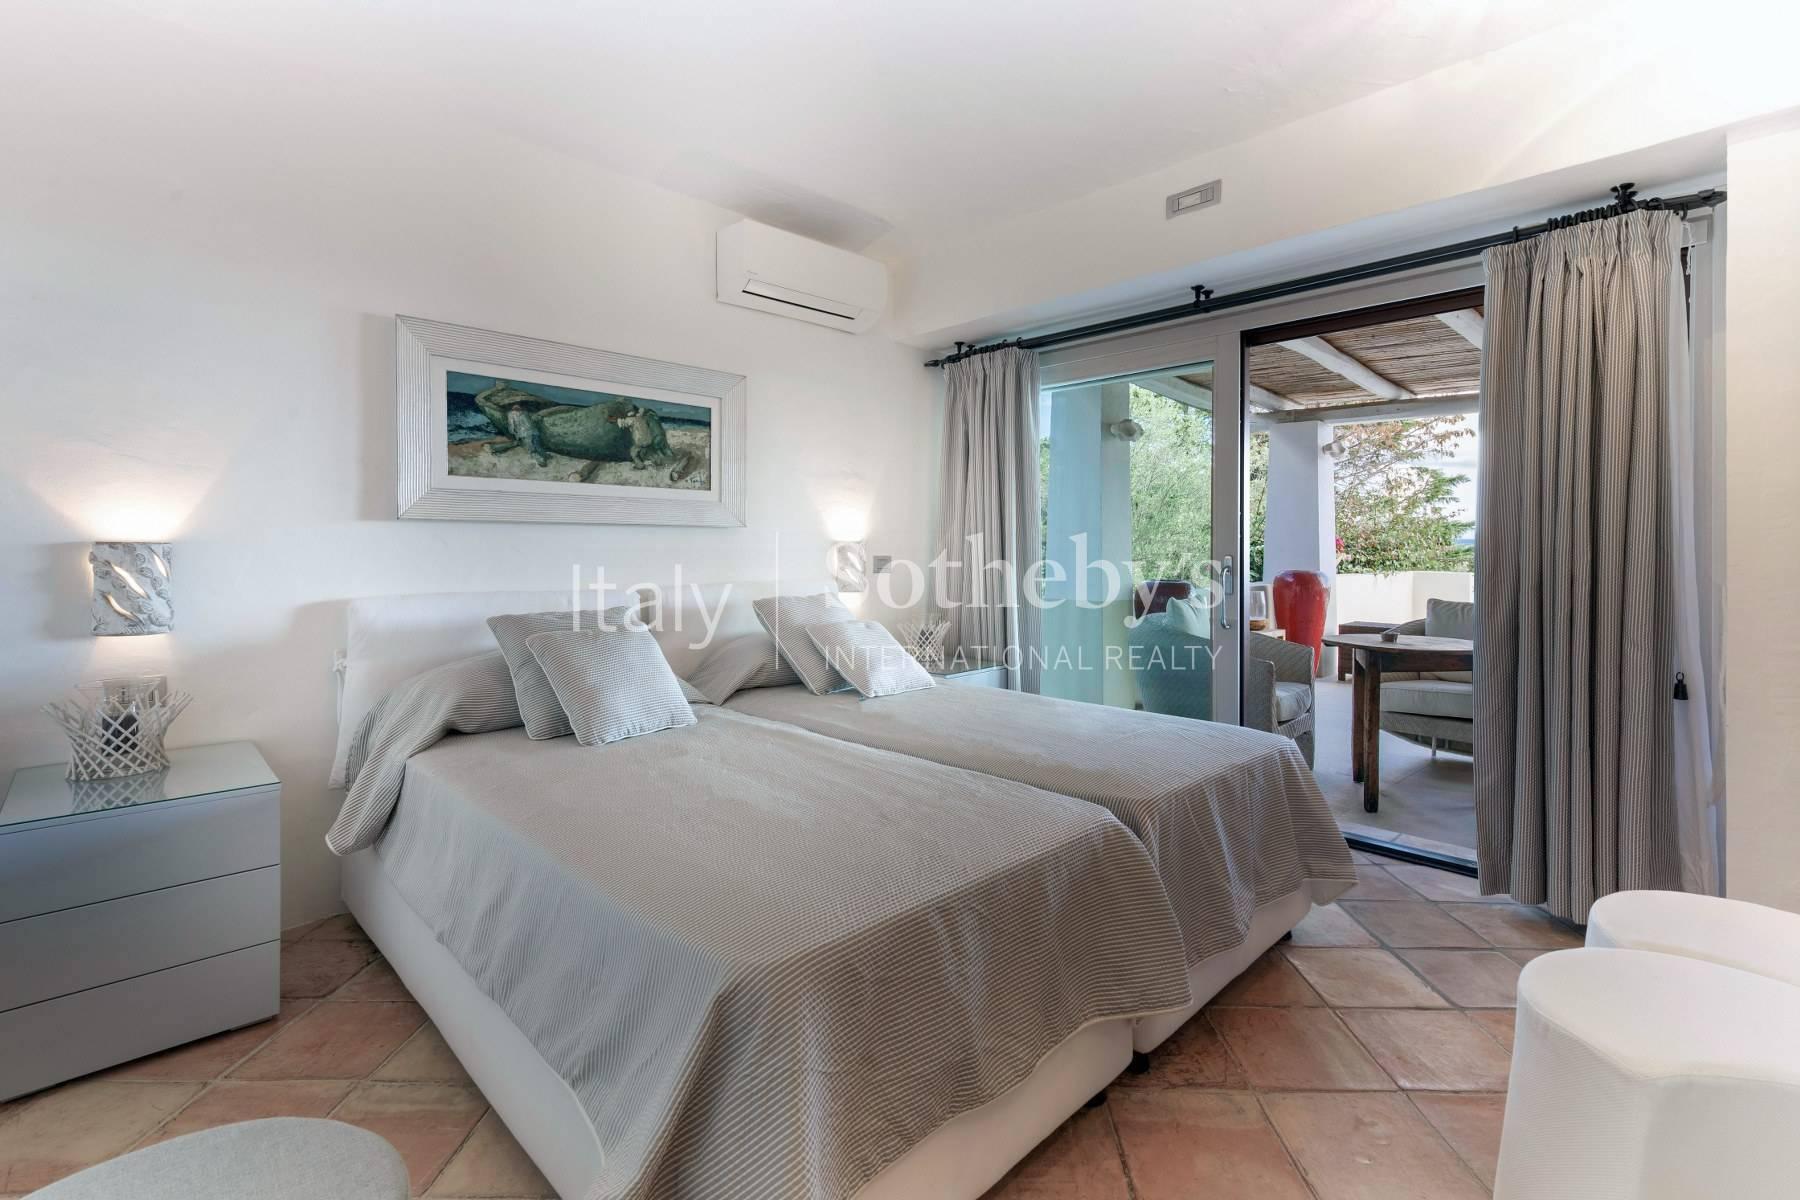 Seaview independent villa in the hill of Pantogia - 10